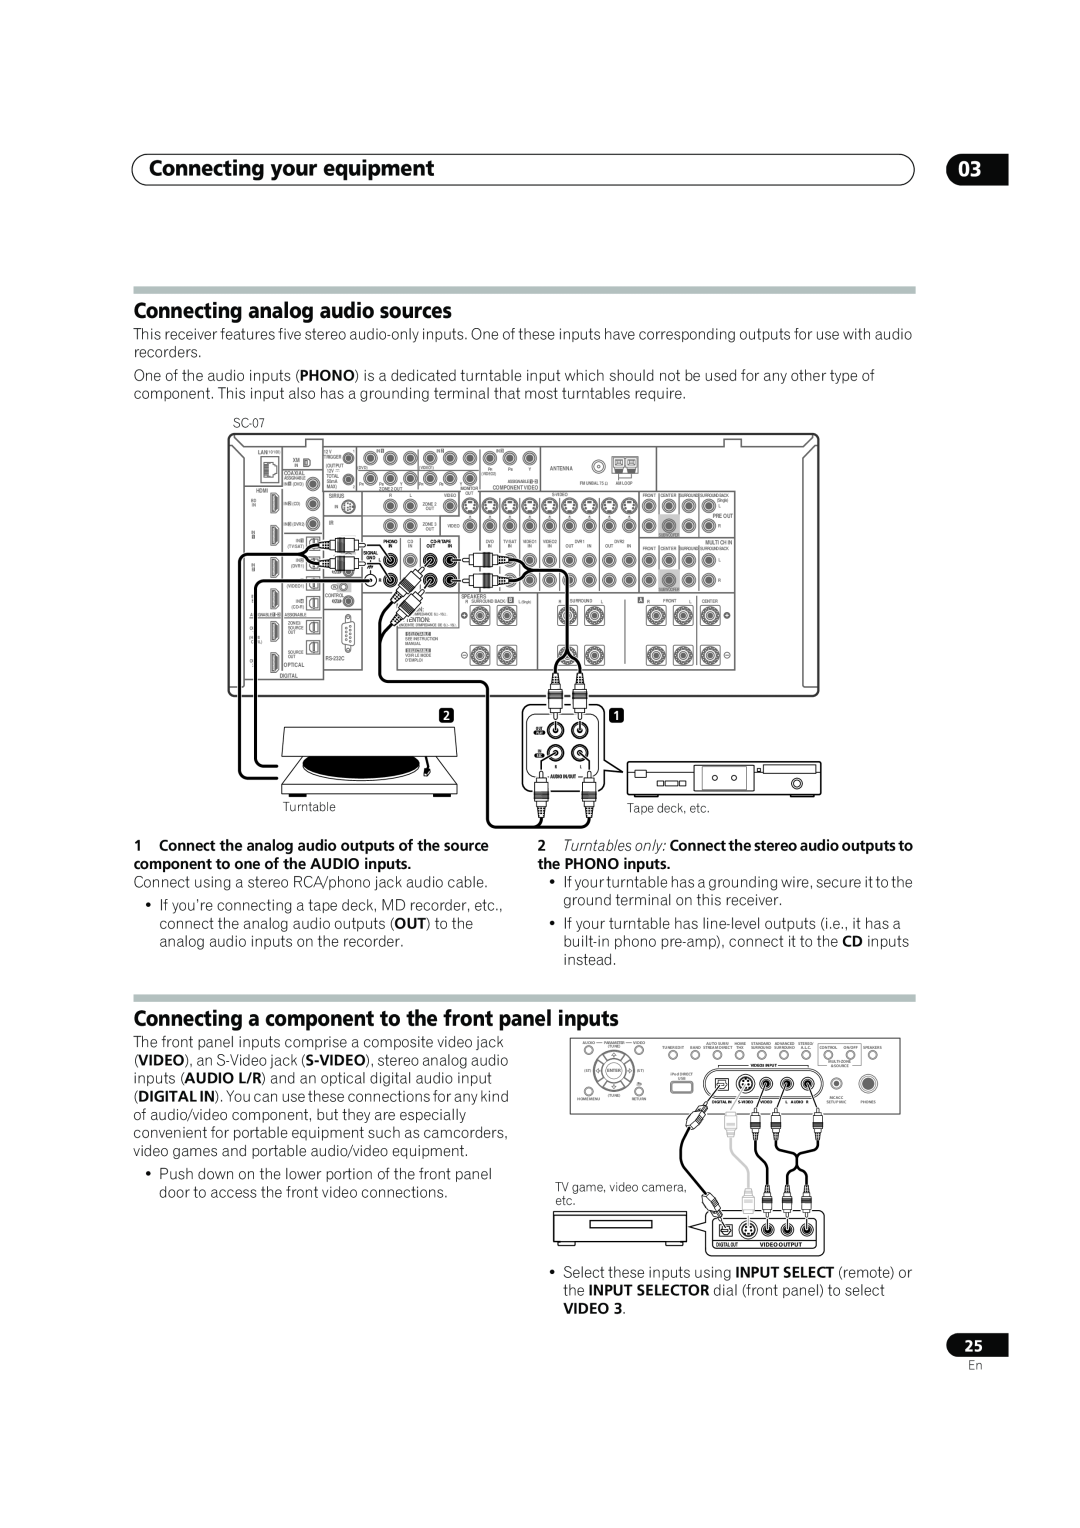 Pioneer SC-05 Connecting analog audio sources, Connecting a component to the front panel inputs, Connecting your equipment 